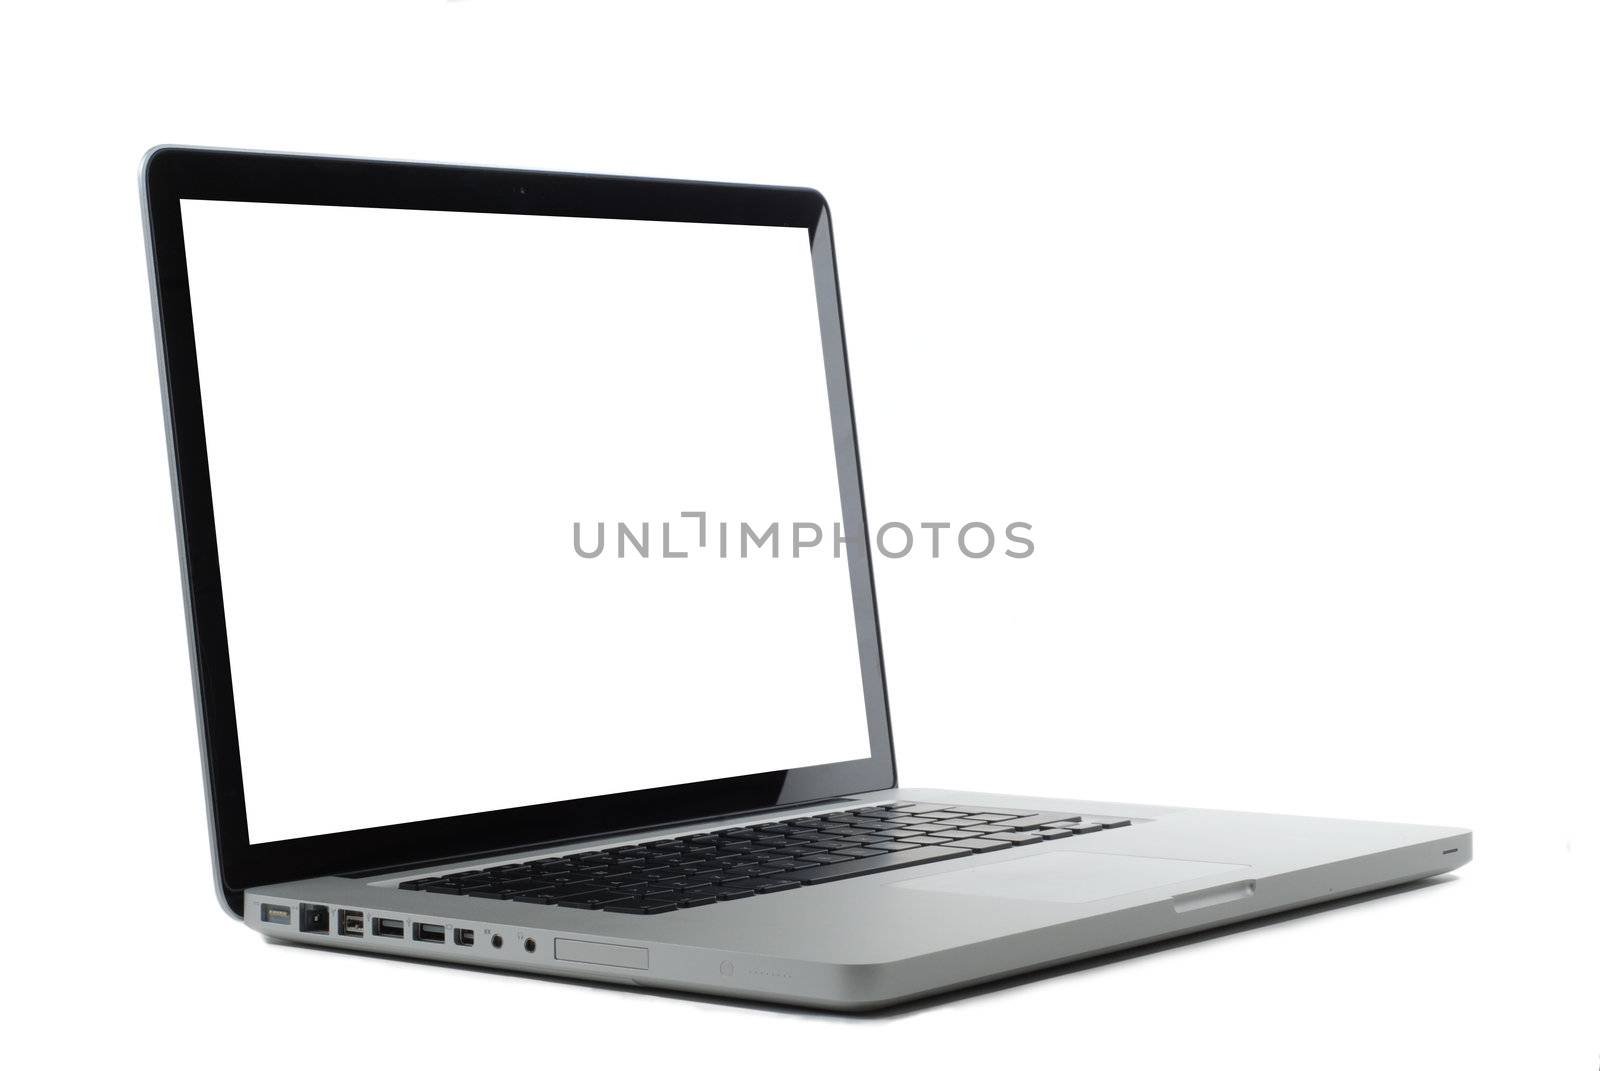 Laptop isolated on white with blank monitor for copy or images